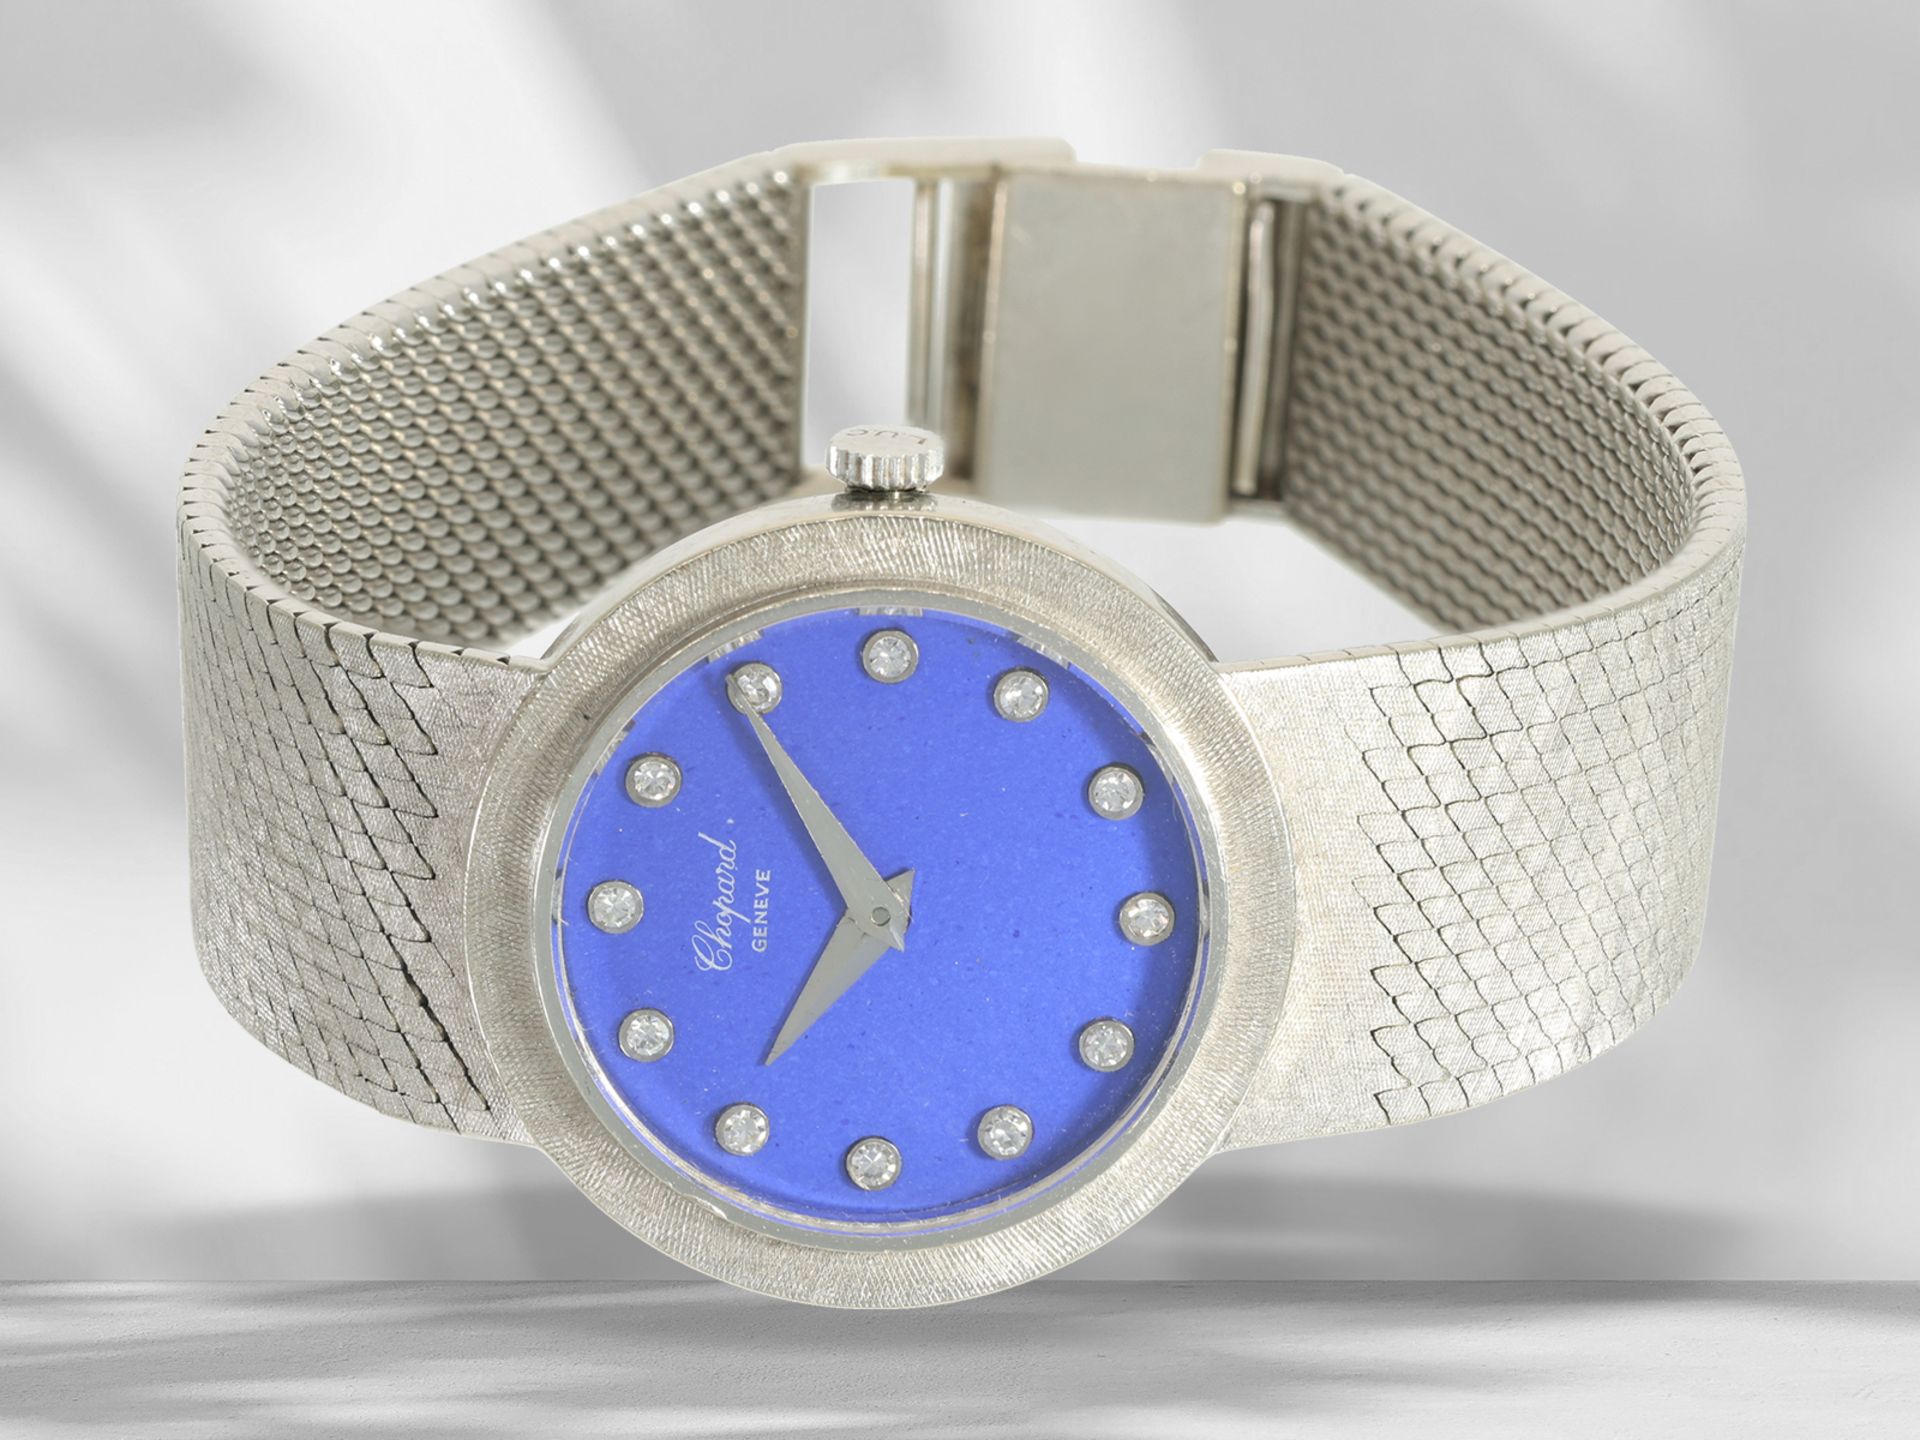 Wristwatch: fine, white gold vintage ladies' watch by Chopard, manual winding, 18K white gold - Image 2 of 3